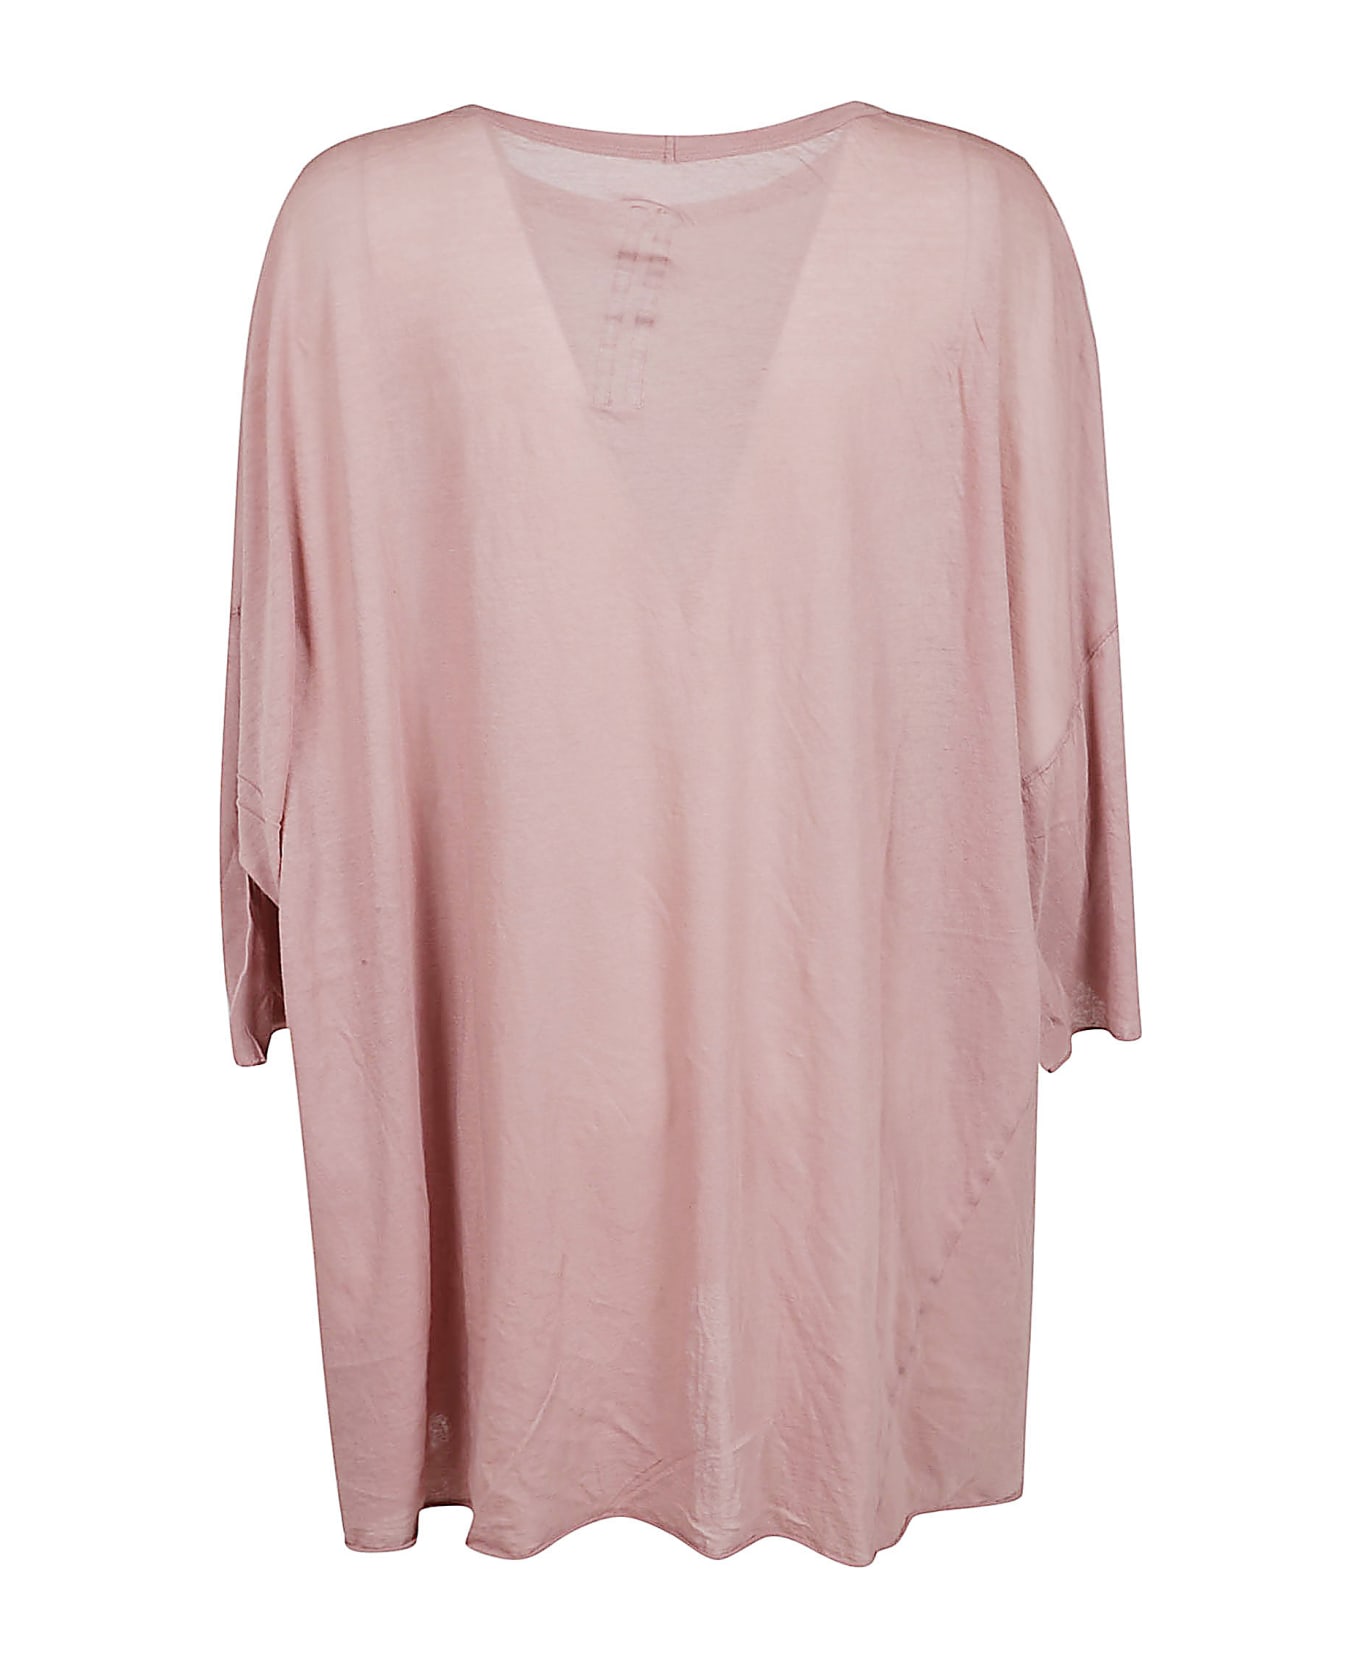 Rick Owens Tommy T-shirt - Dusty Pink